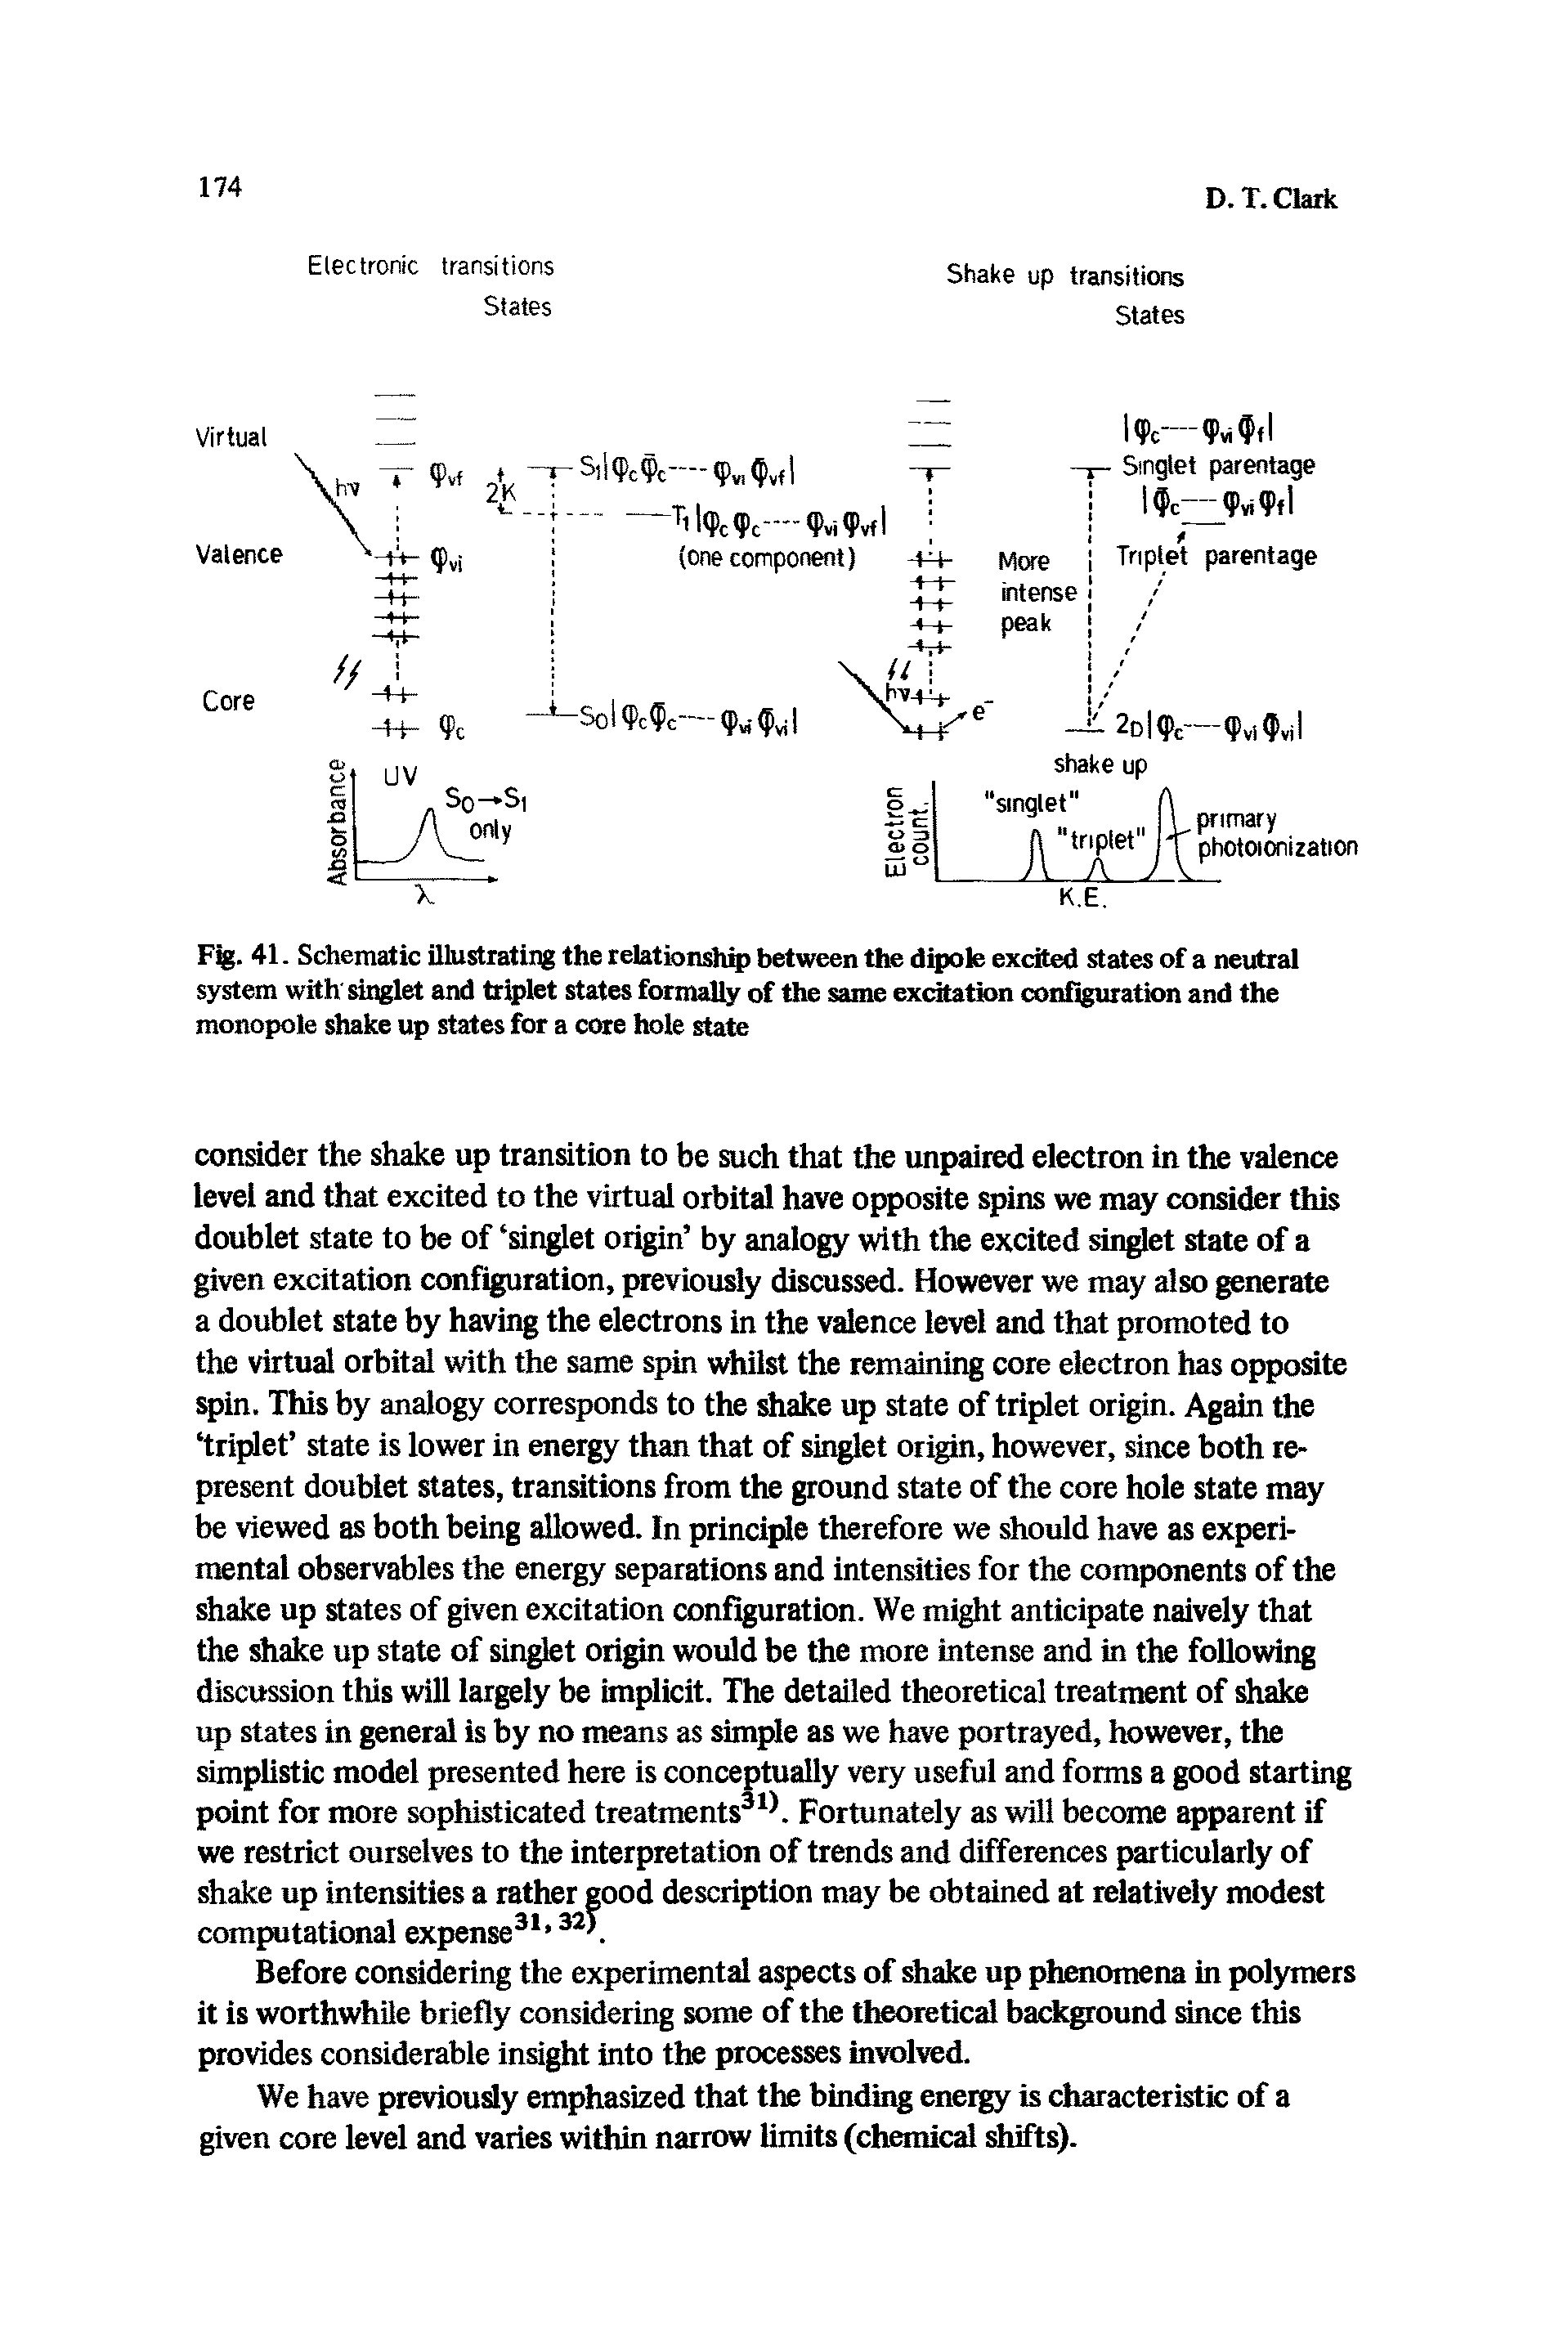 Fig. 41. Schematic illustrating the relationship between the dipole excited states of a neutral system with siqglet and triplet states formally of the same excitation configuration and the monopole shake up states for a core hole state...